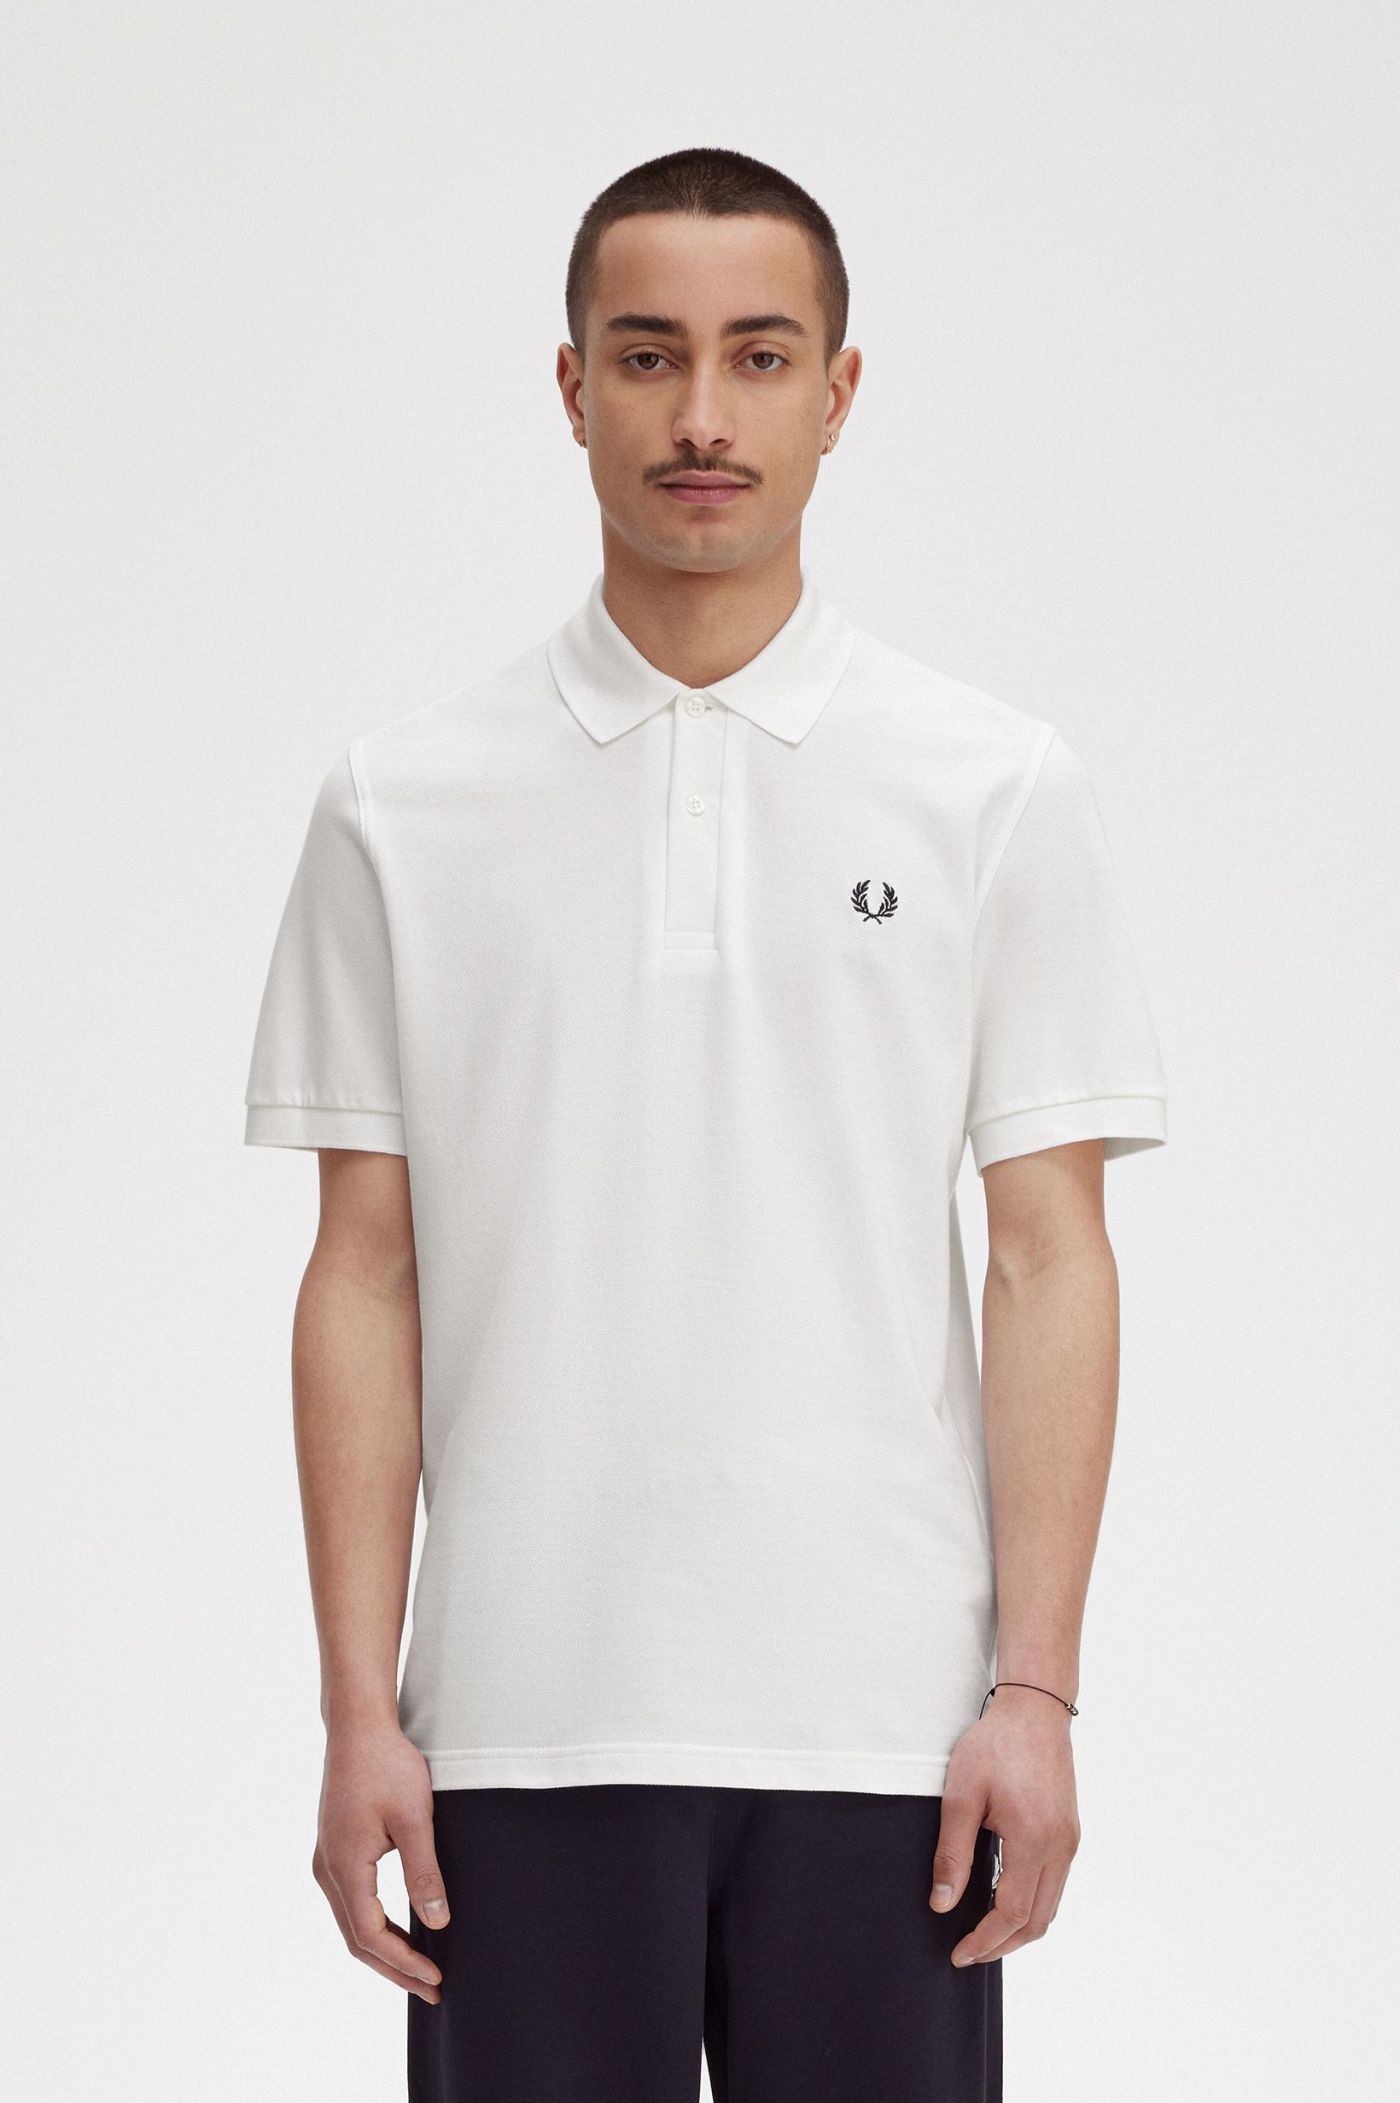 M3 - White / Navy | The Fred Perry Shirt | Men's Short & Long